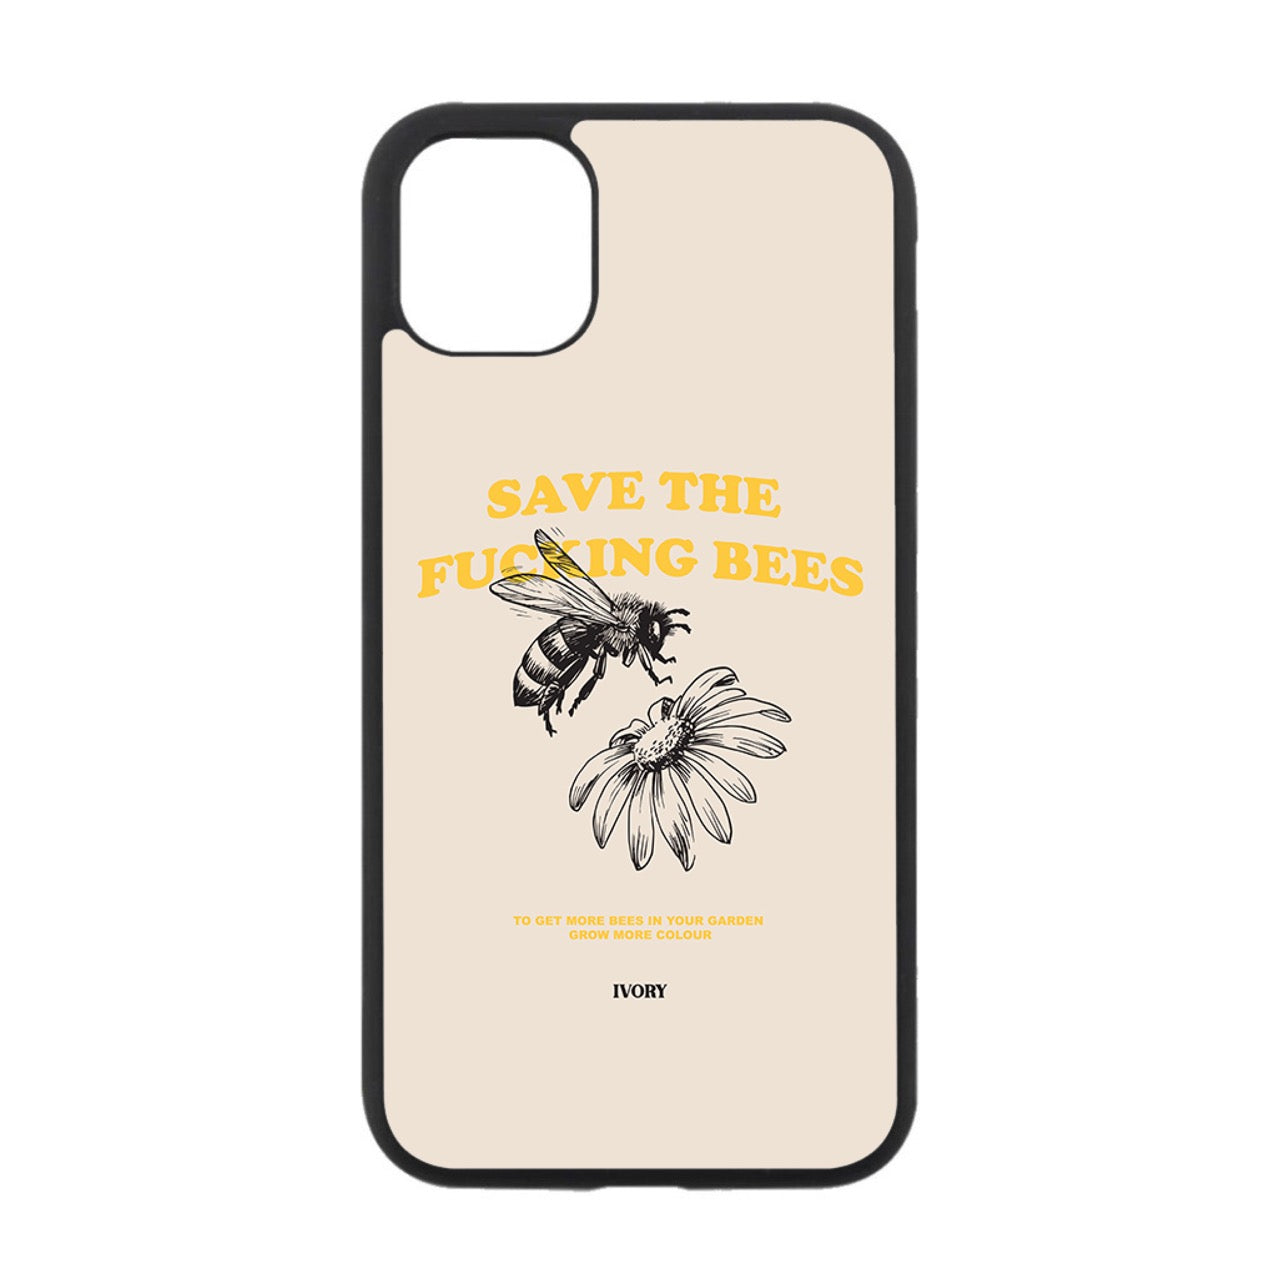 SAVE THE BEES IPHONE CASE